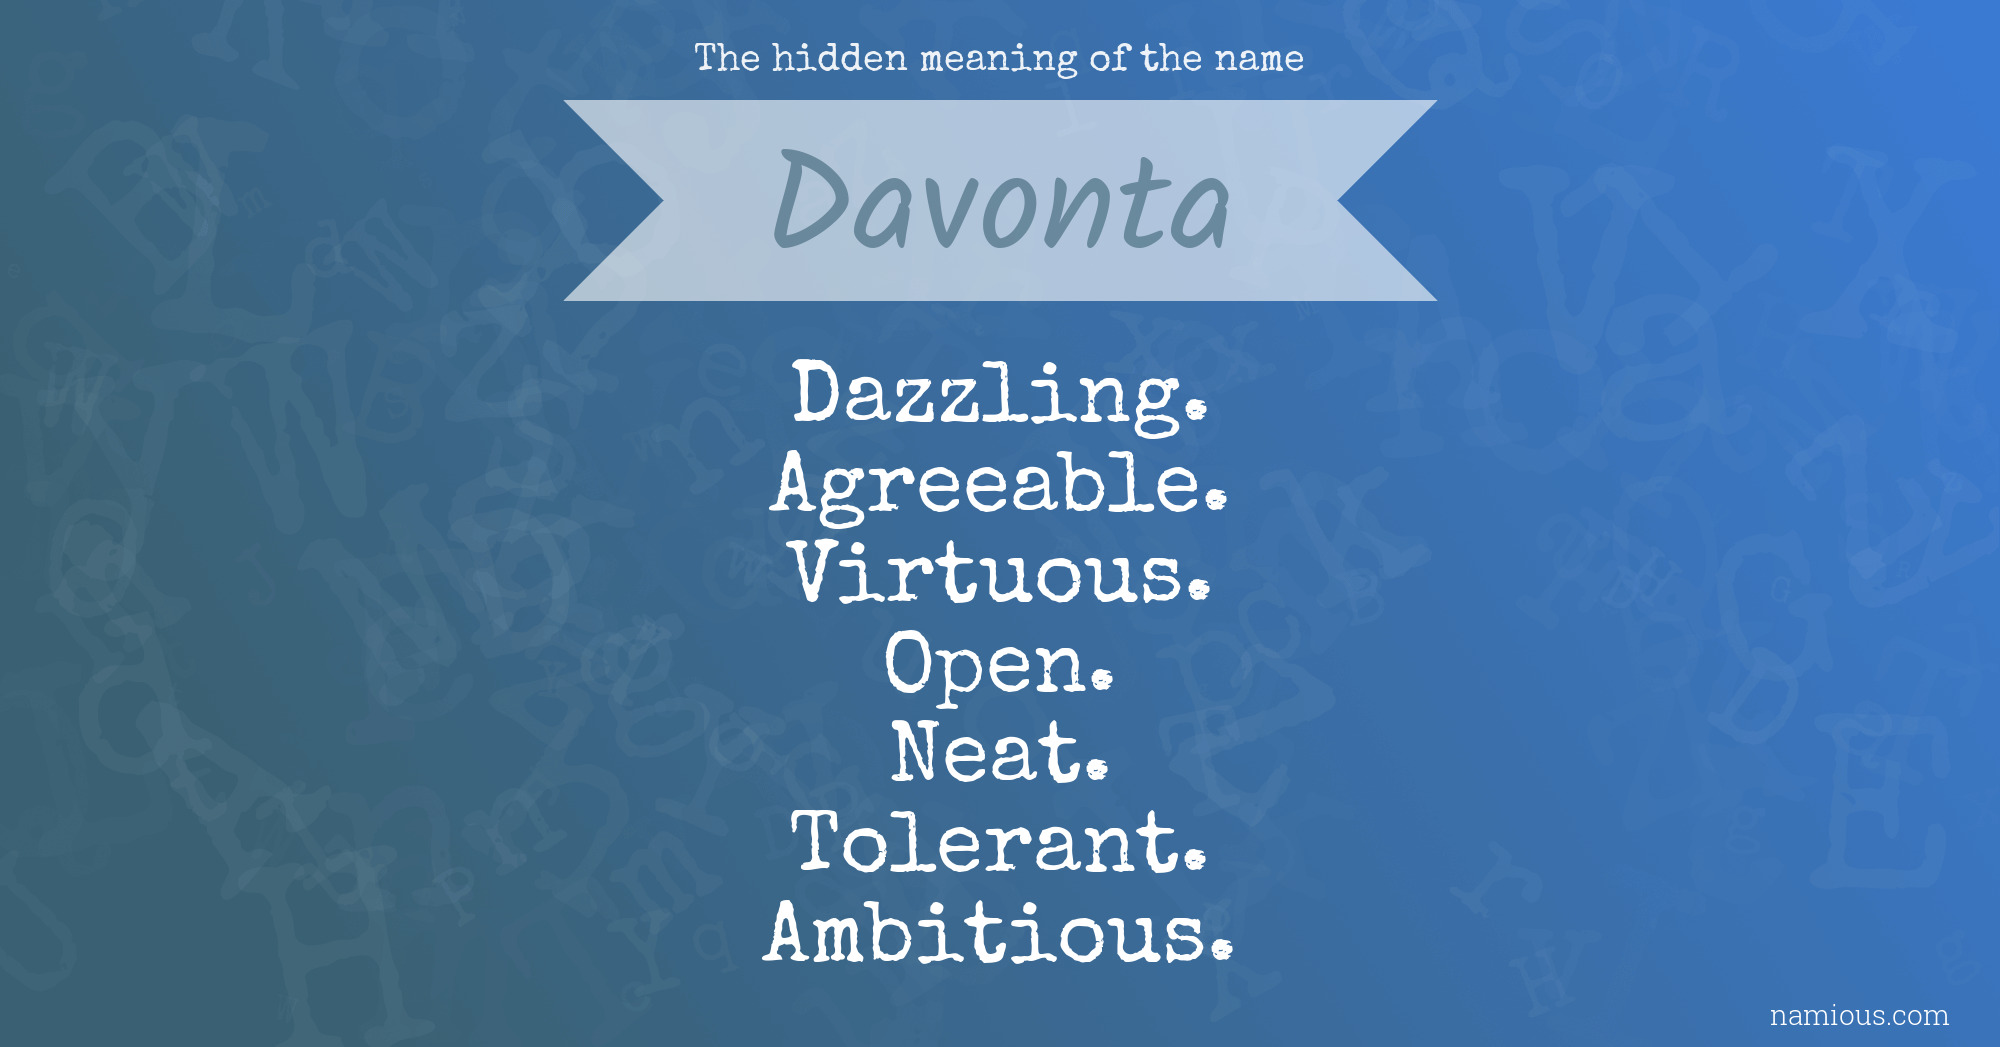 The hidden meaning of the name Davonta